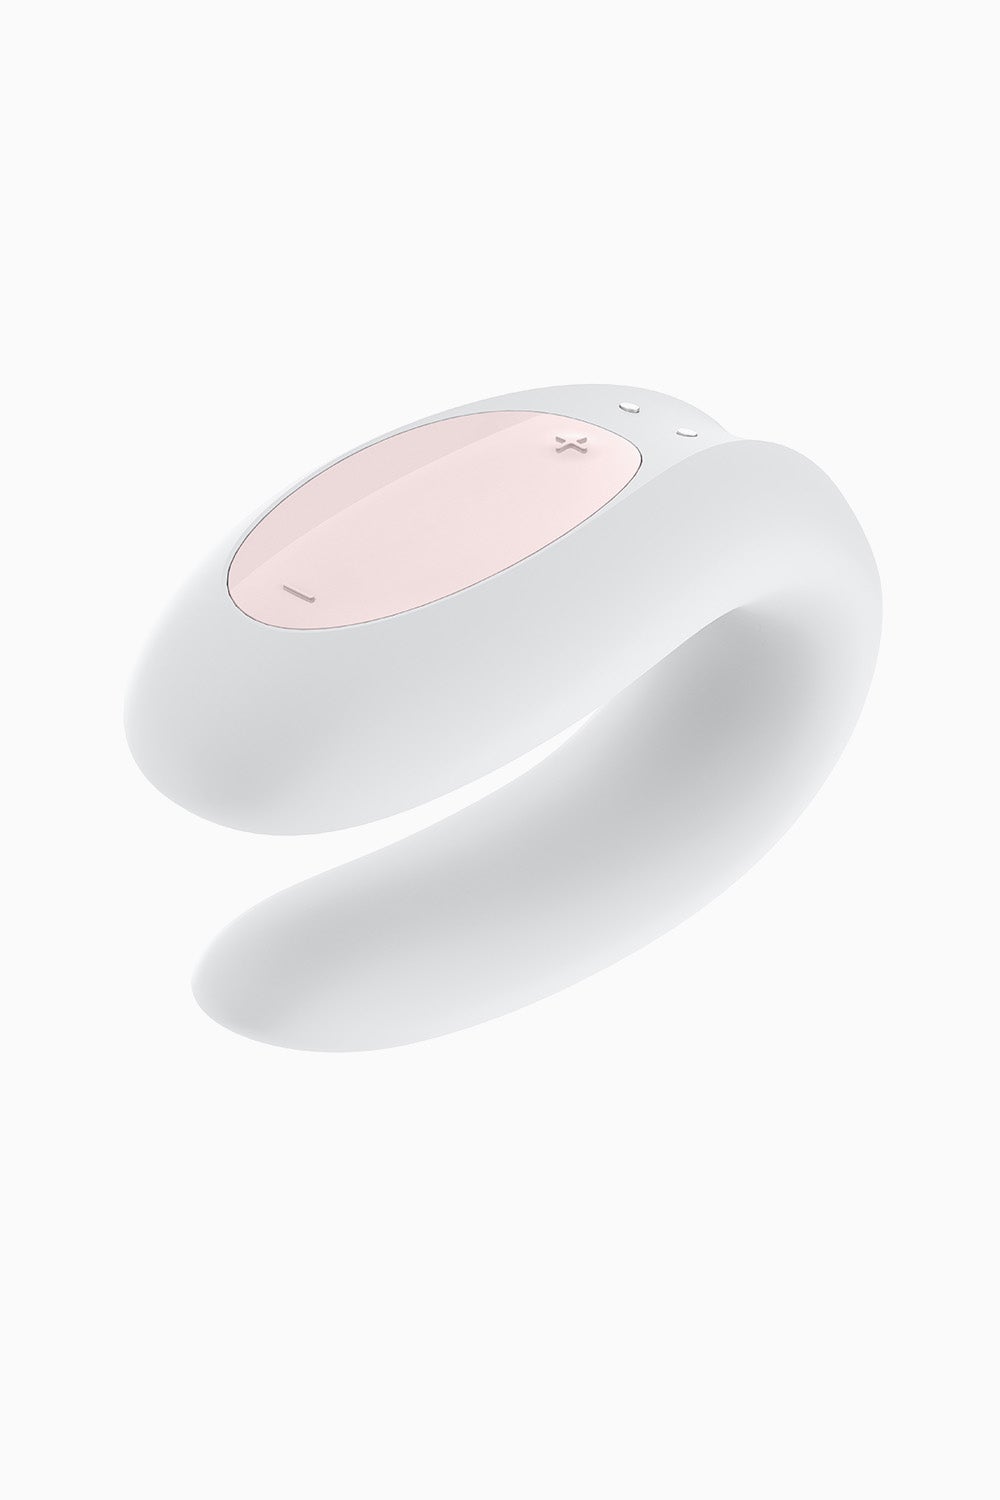 Satisfyer Double Joy Rechargeable Couples Vibrator White, 3.5 Inches